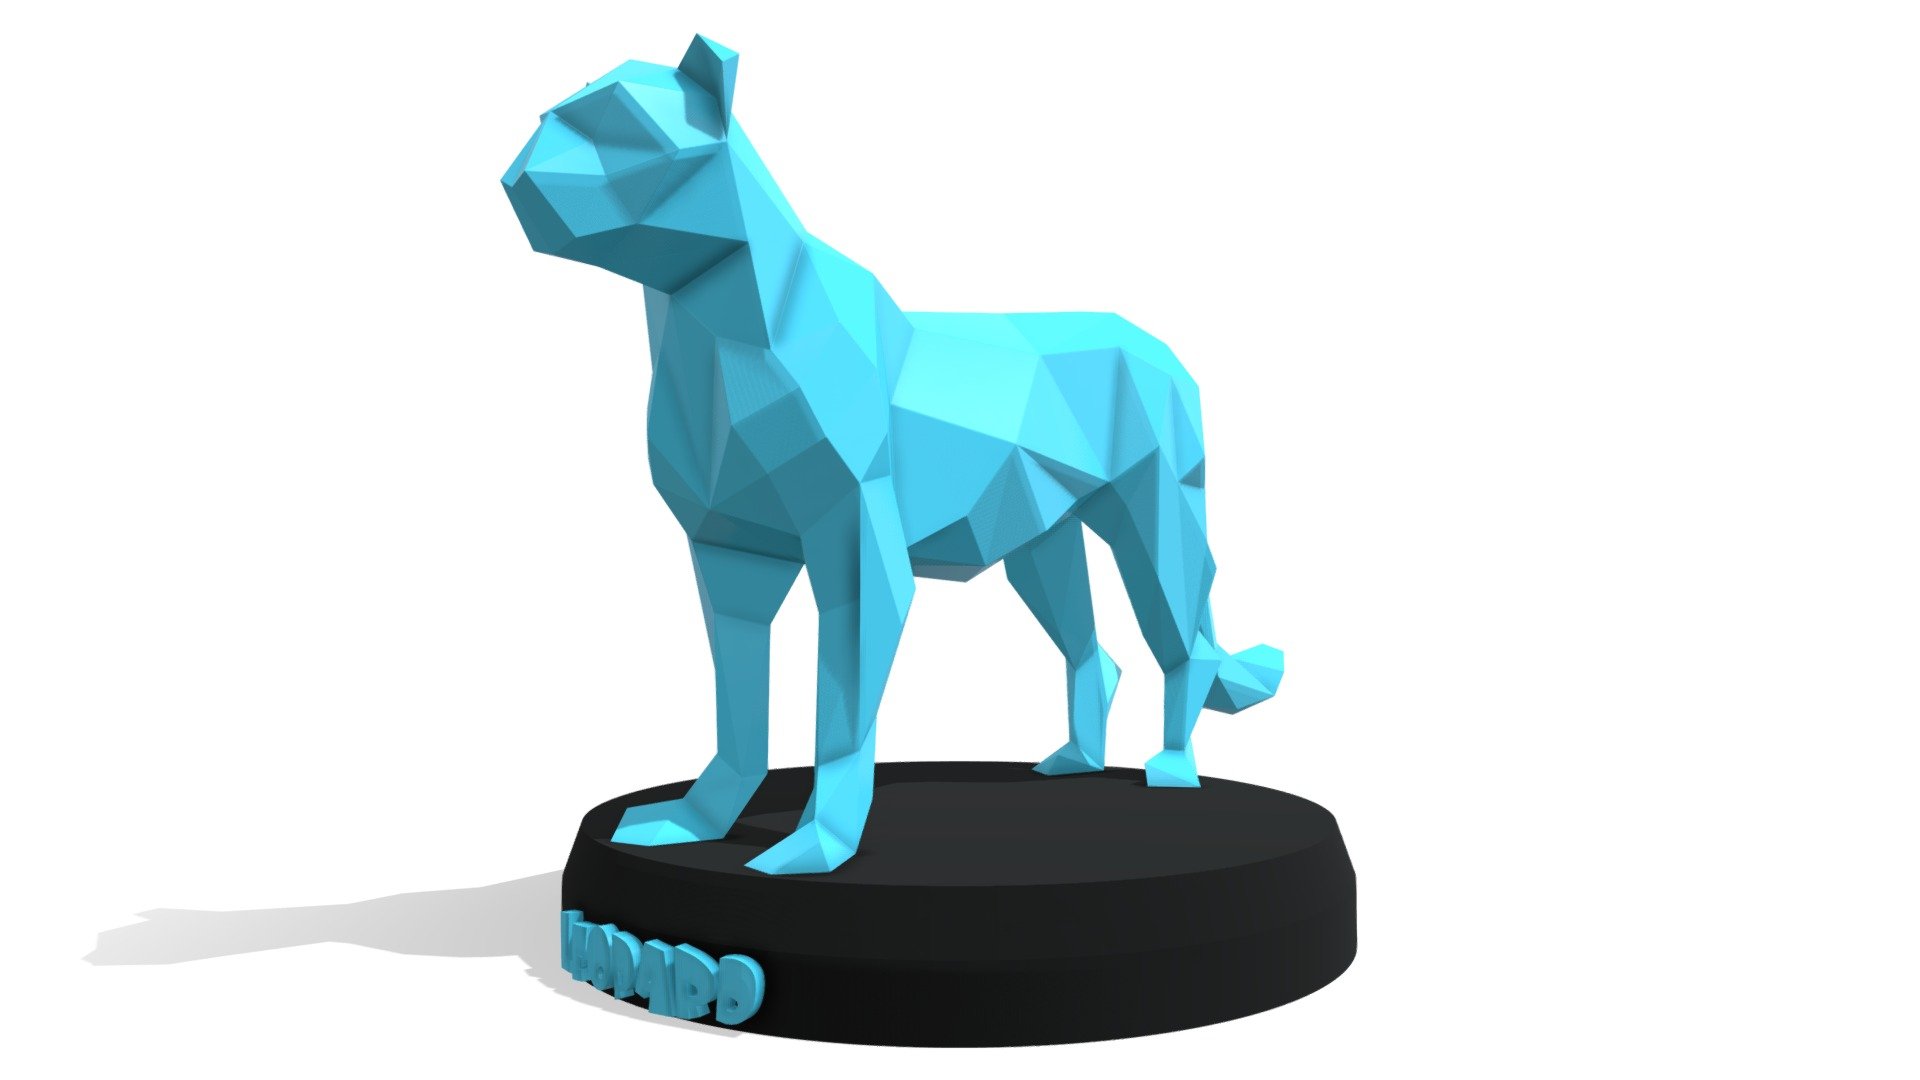 Polygonal 3D Model with Parametric modeling with gold material, make it recommend for :




Basic modeling 

Rigging 

sculpting 

Become Statue

Decorate

3D Print File

Toy

Have fun  :) - Poly Leopard - Buy Royalty Free 3D model by Puppy3D 3d model